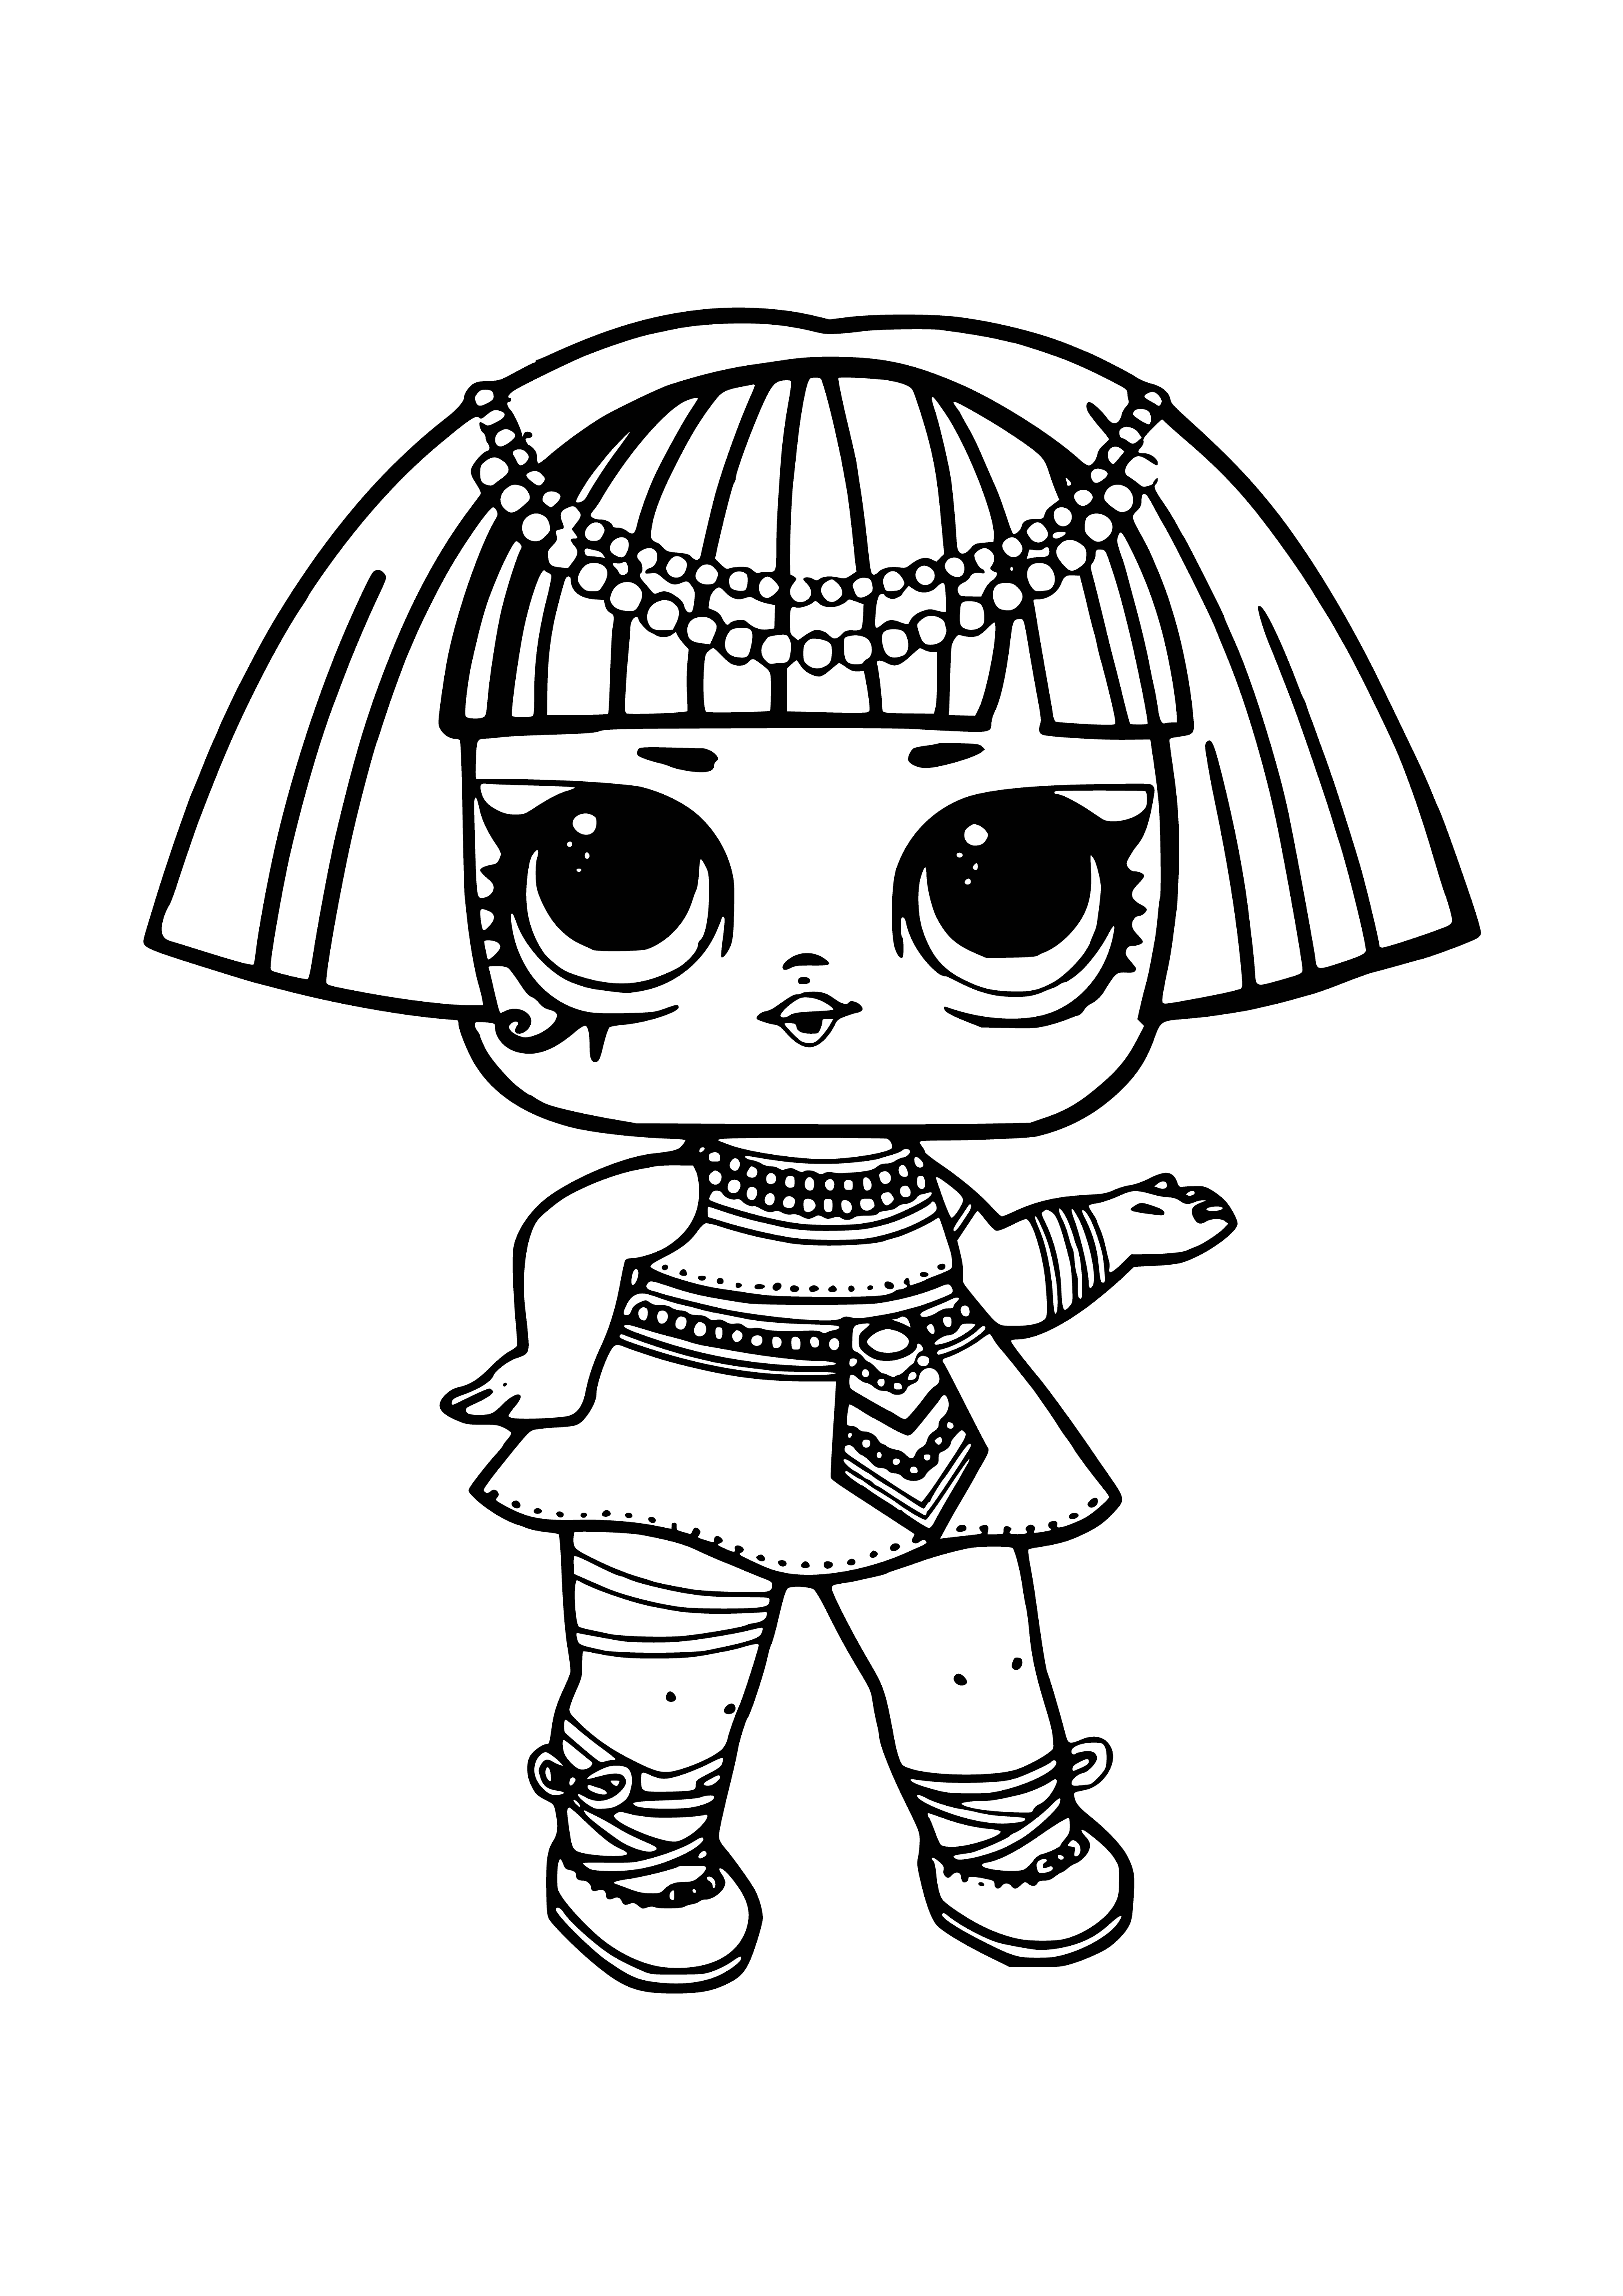 coloring page: A pharaoh babe confetti pop: blue lollipop with a blue-clad pharaoh babe with blue eyes & lips, plus blue streaks in the lollipop.